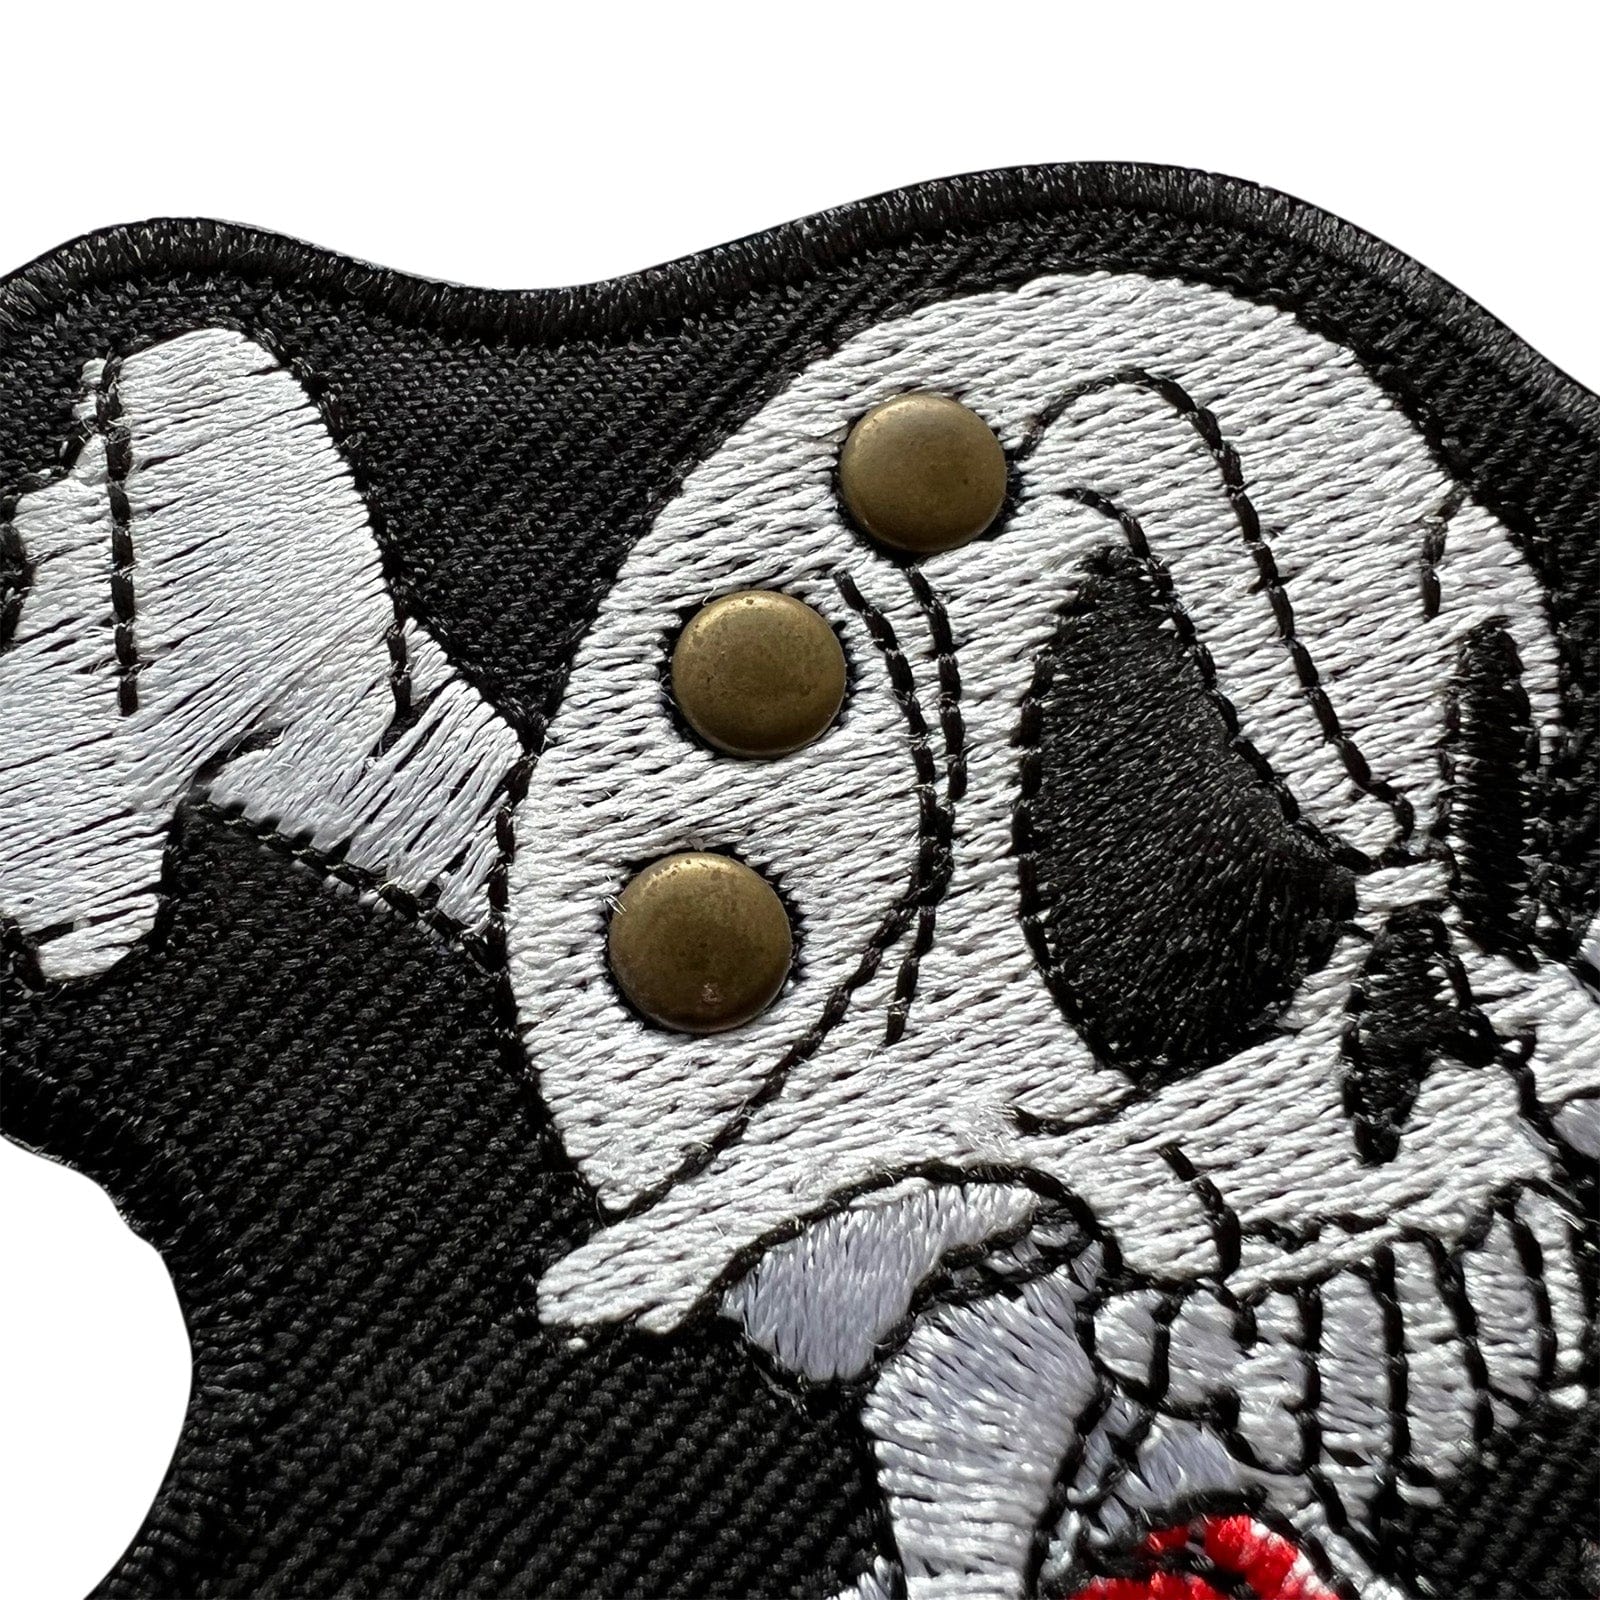 Skull and Crossbones Studded Patch Iron On Sew On Clothes Bag Embroidered Badge